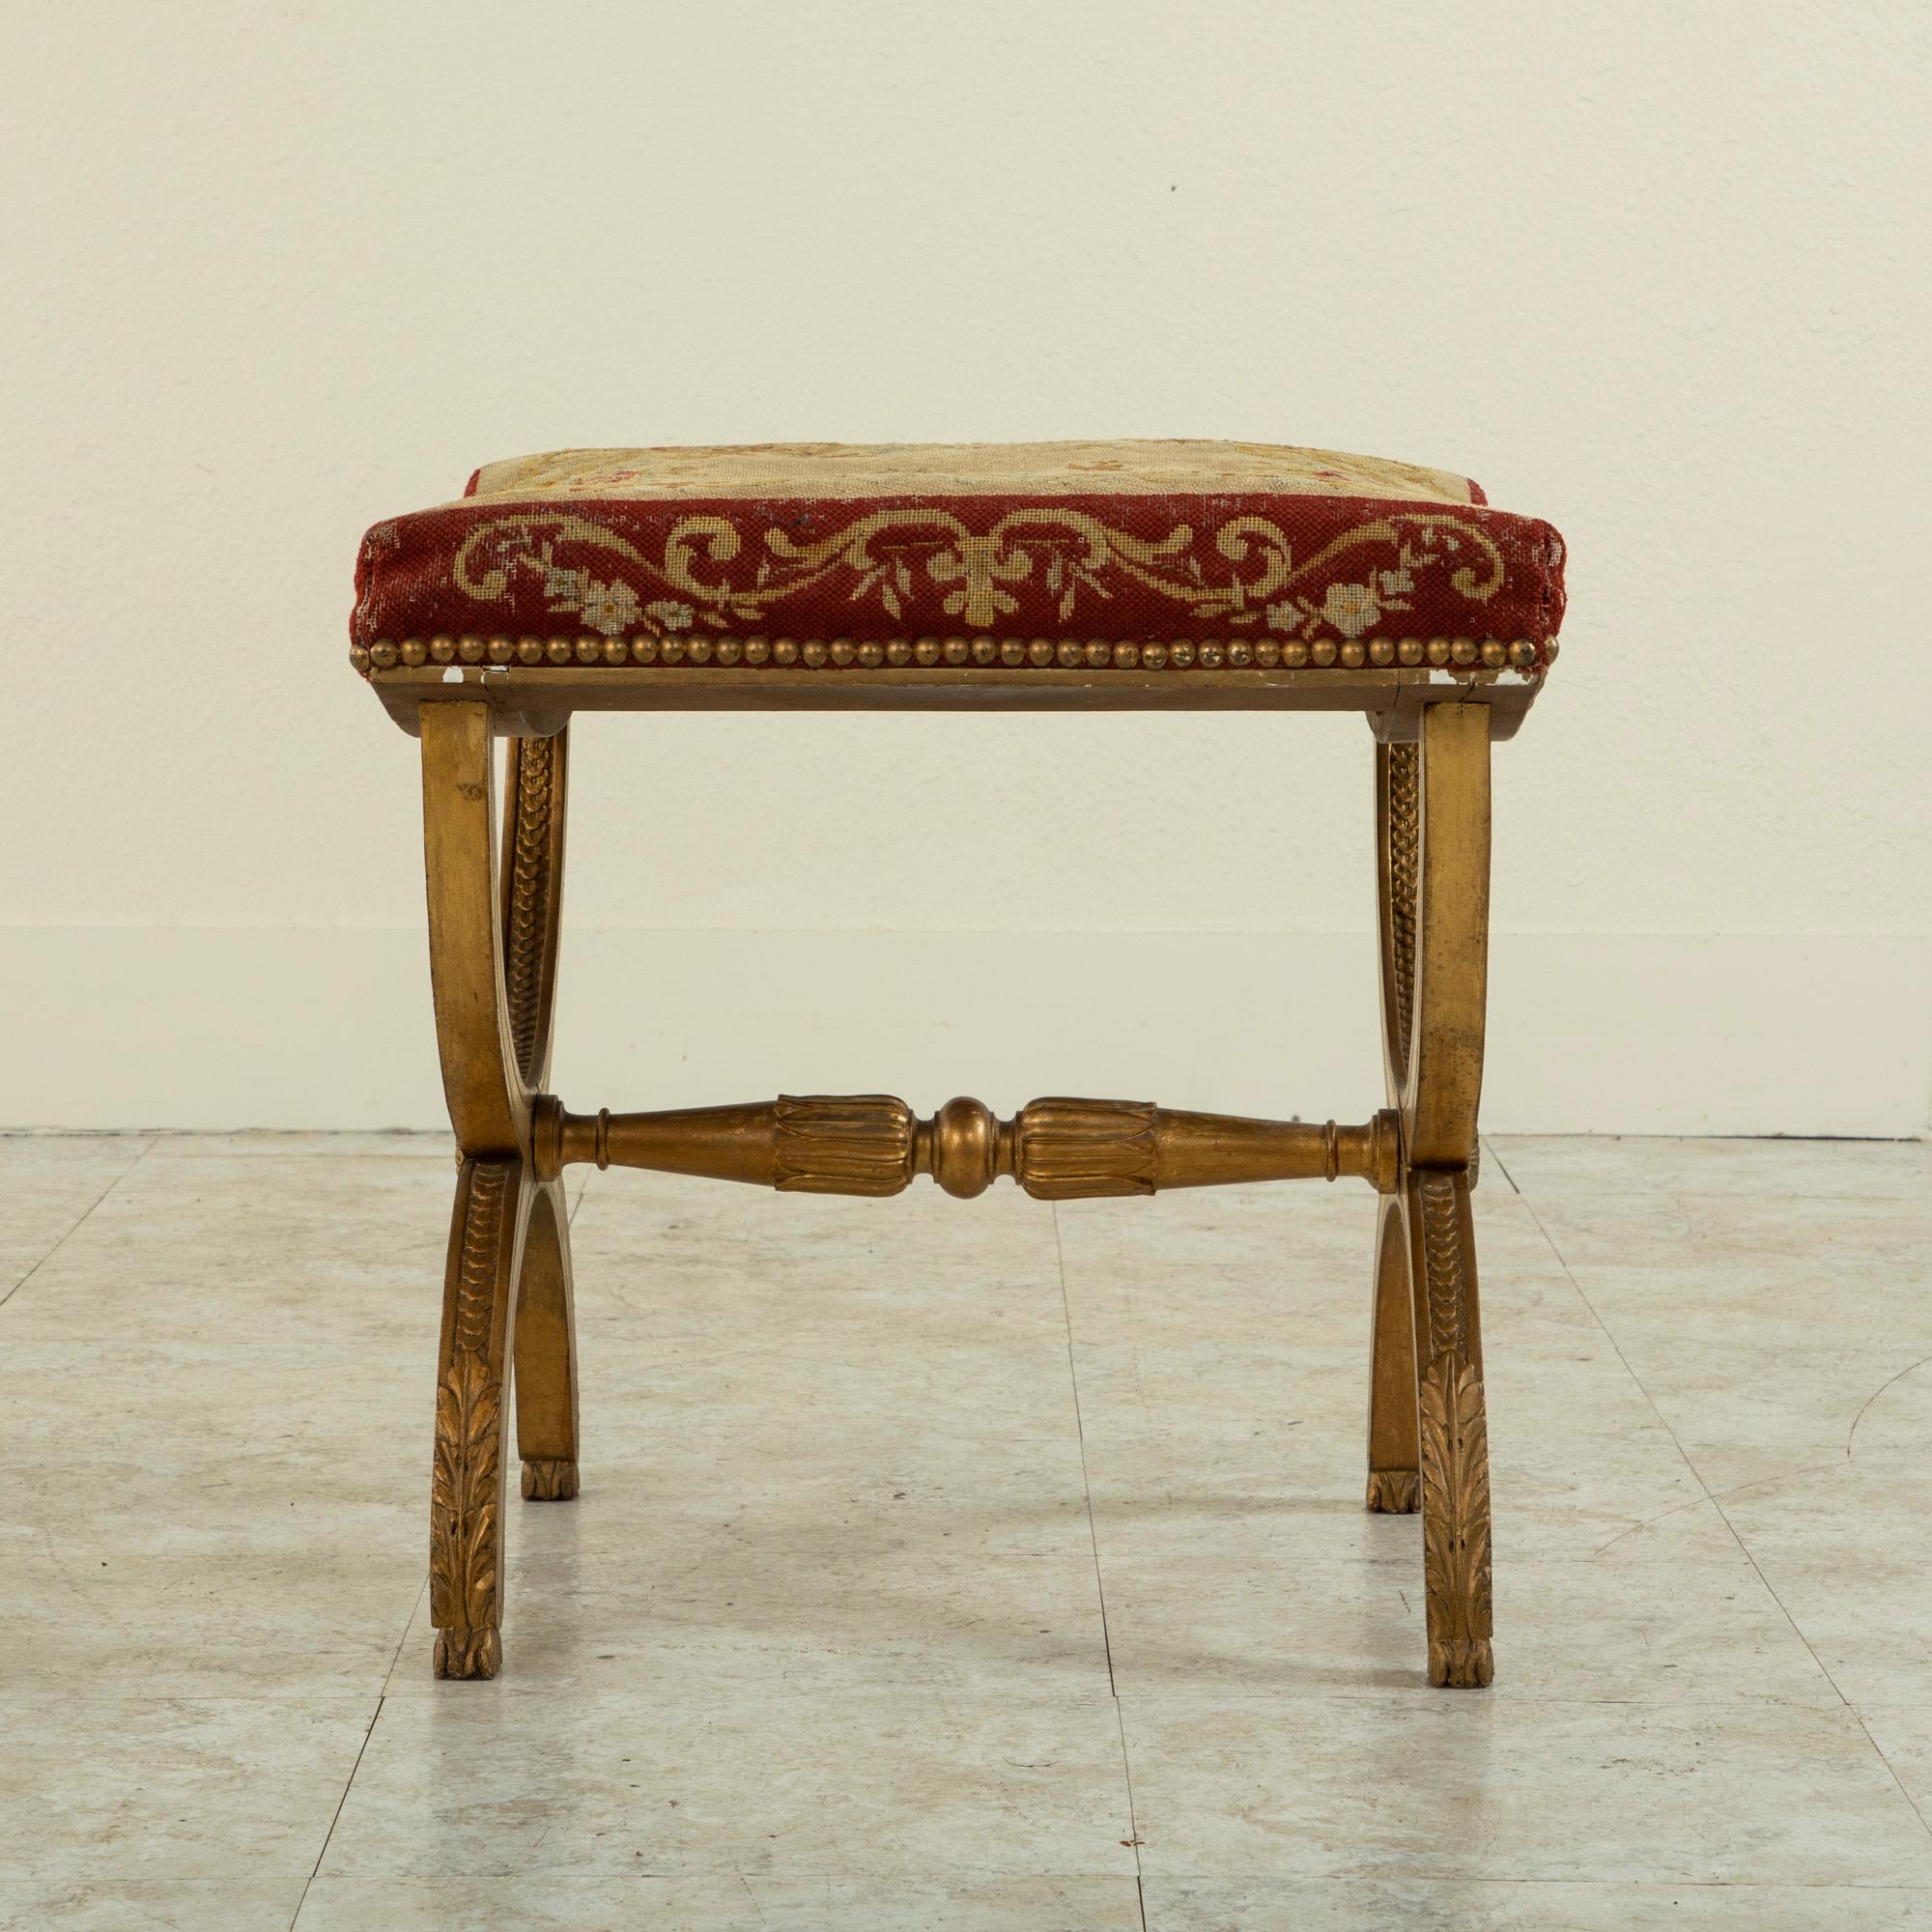 19th Century French Louis XIV Giltwood Bench, Vanity Stool with Needlepoint Seat 2